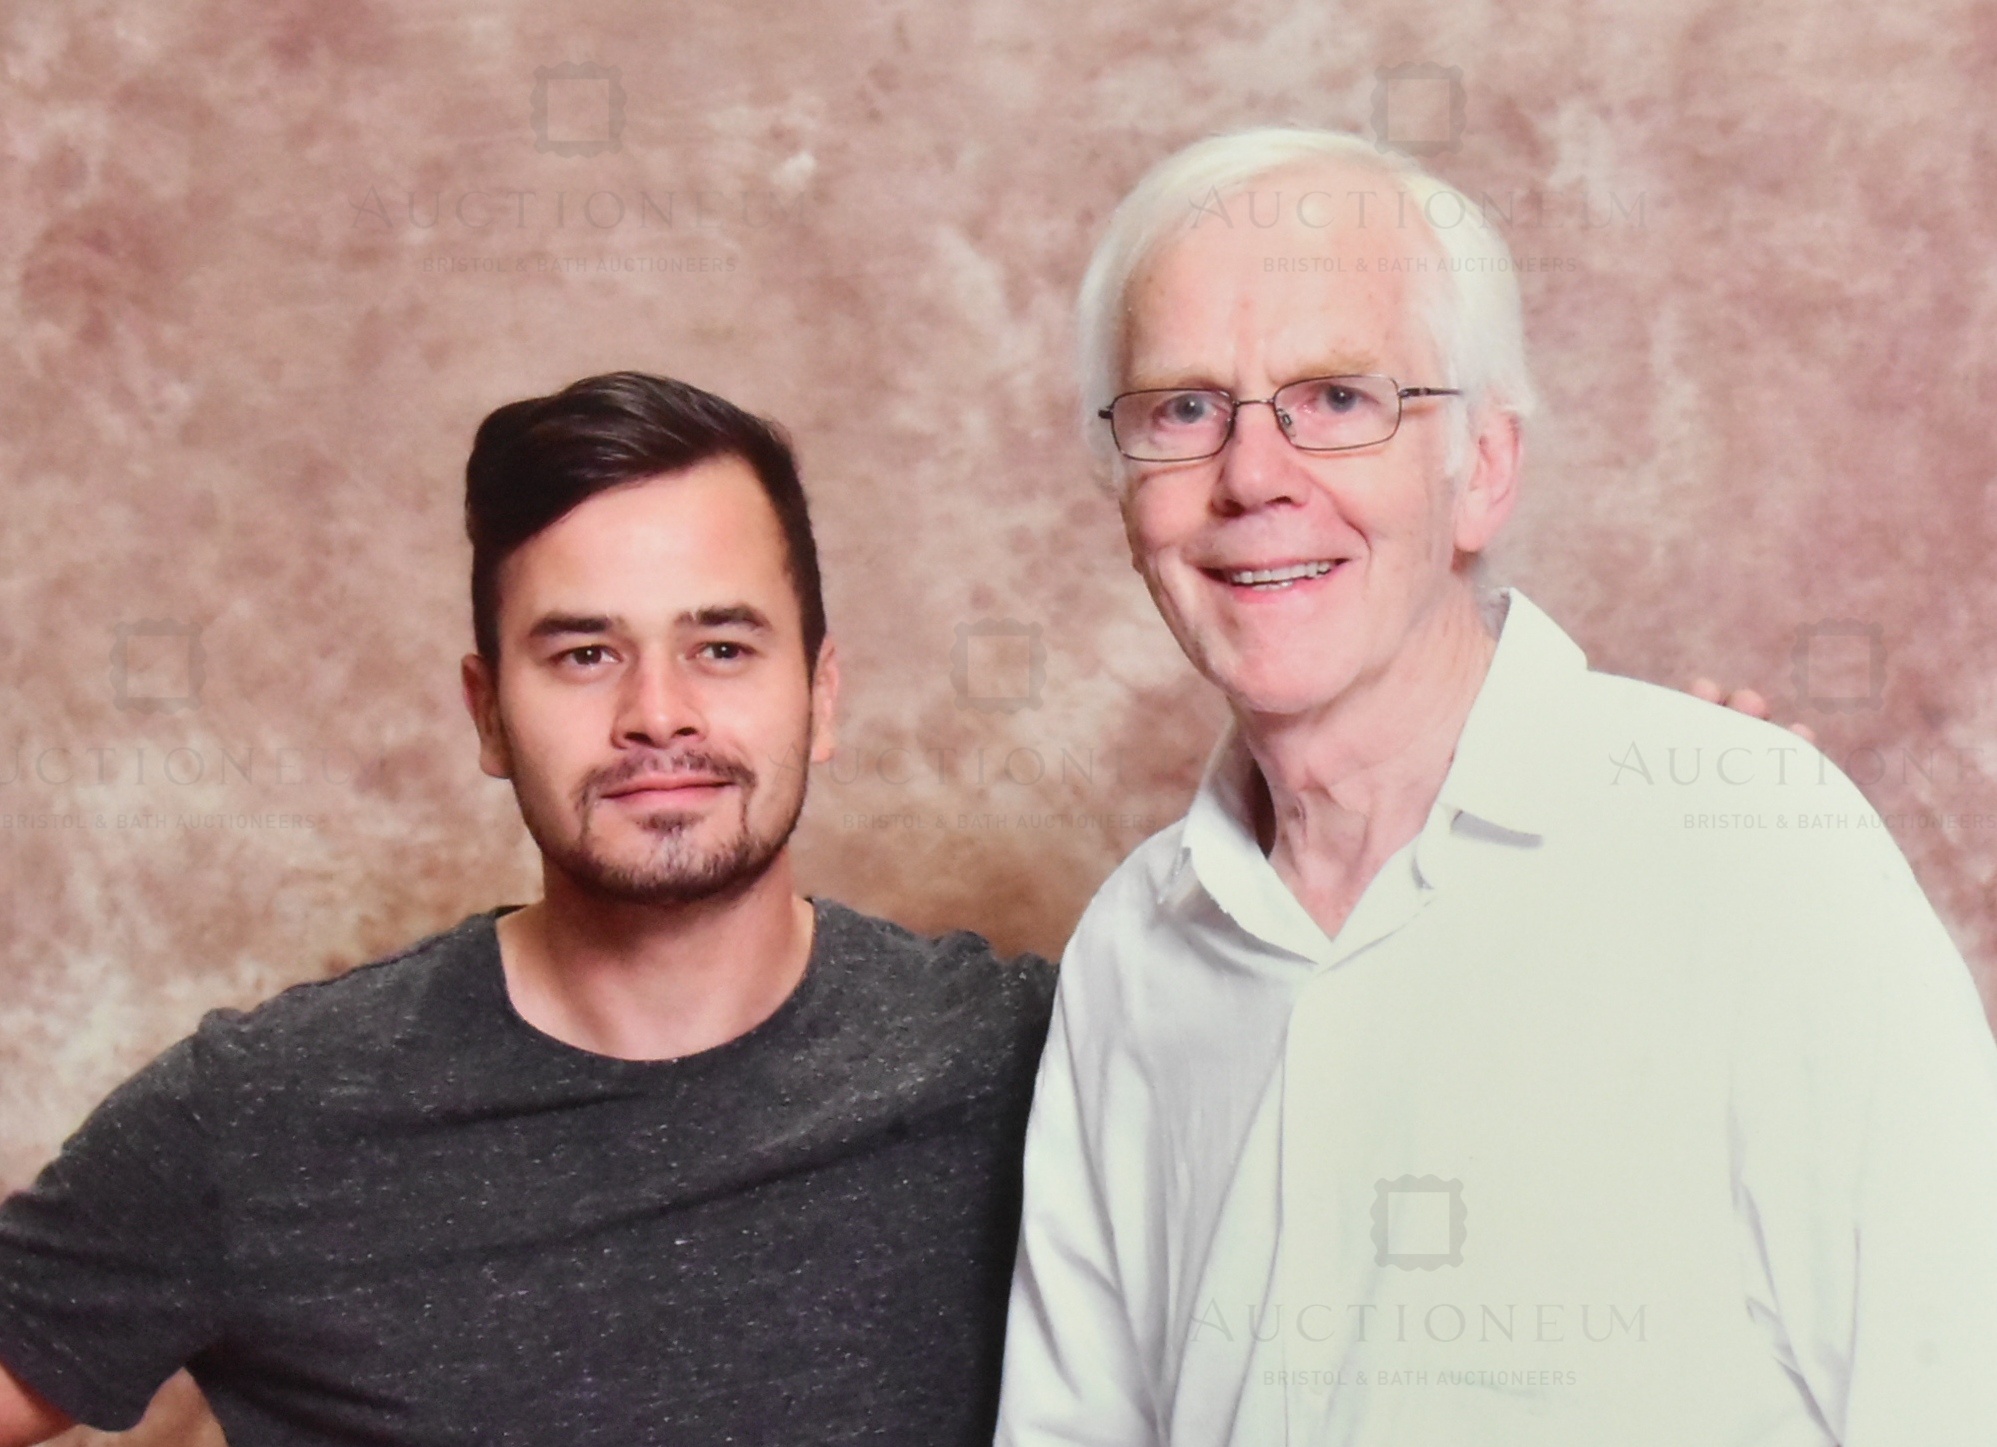 ESTATE OF JEREMY BULLOCH - STAR WARS - PERSONAL PHOTOGRAPH - Image 2 of 2